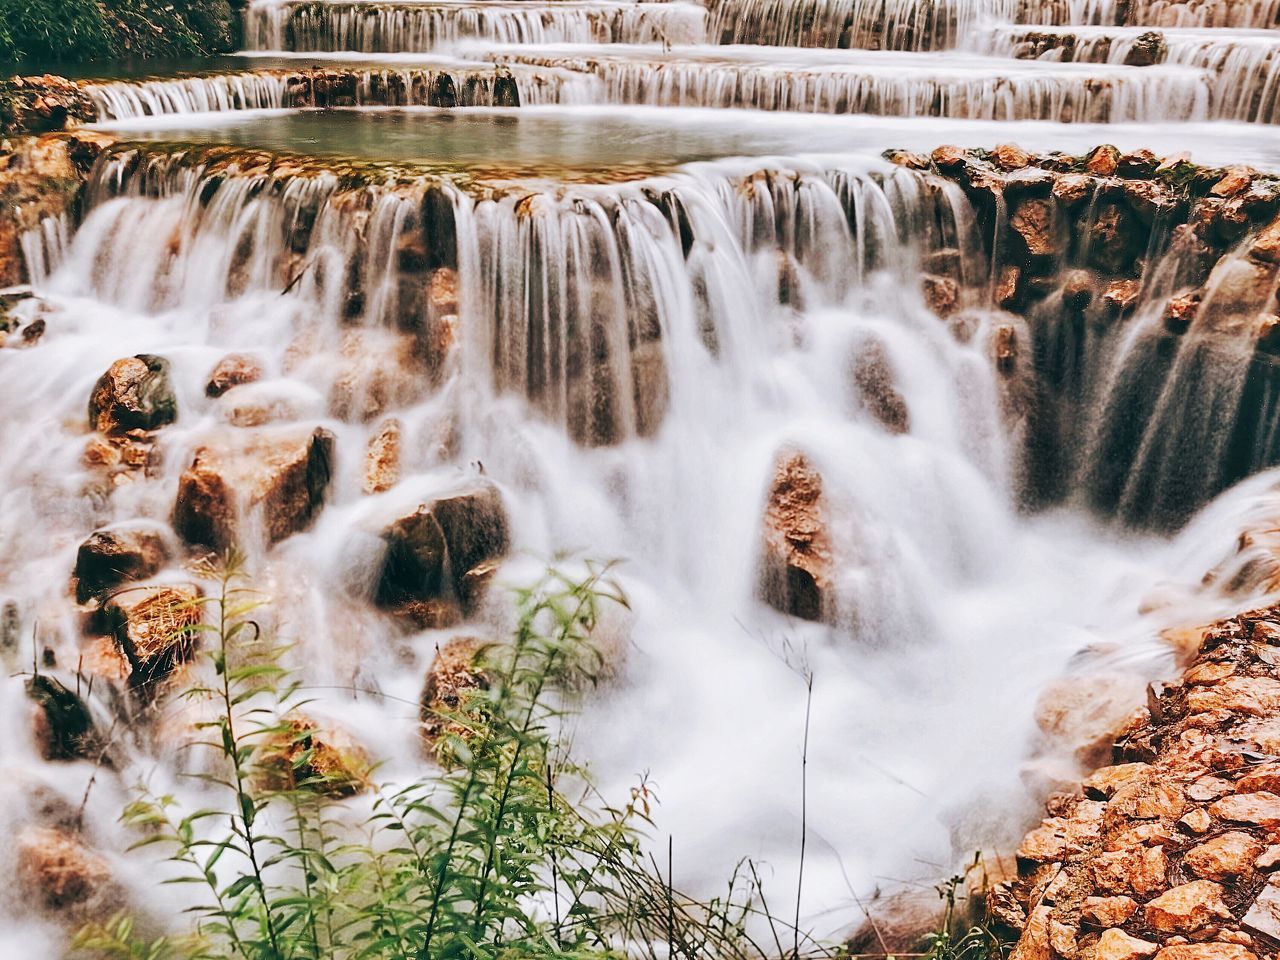 waterfall, water, scenics - nature, beauty in nature, nature, motion, water feature, environment, long exposure, travel destinations, plant, flowing water, flowing, rock, body of water, no people, tourism, travel, land, watercourse, tree, river, outdoors, autumn, forest, blurred motion, day, landscape, architecture